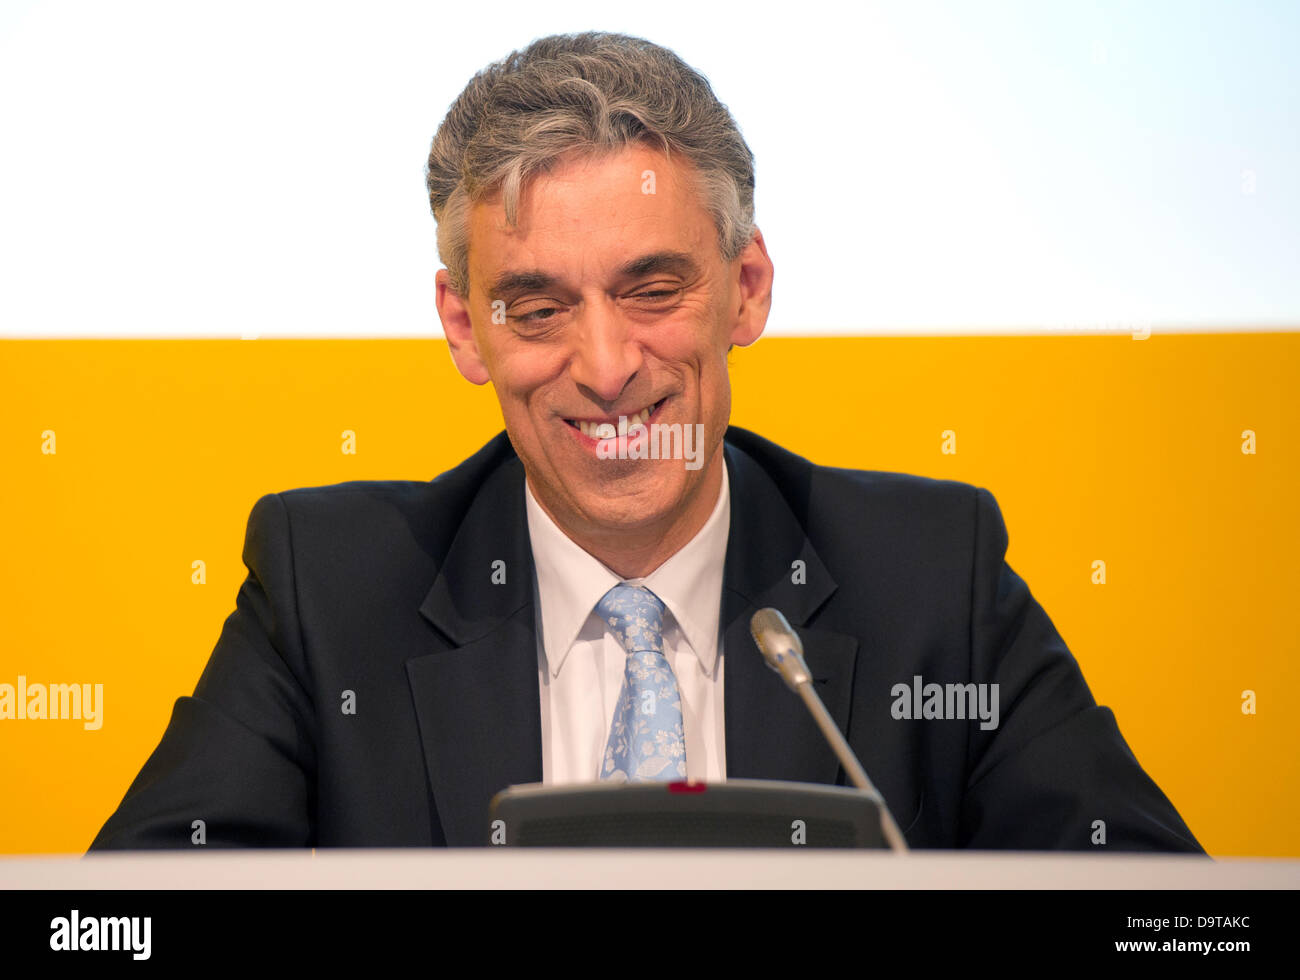 CEO of Deutsche Post AG, Frank Appel, gives a press conference in Berlin, Germany, 26 June 2013. Appel talked about plans to expand the parcel service DHL. Photo: NICOLAS ARMER Stock Photo